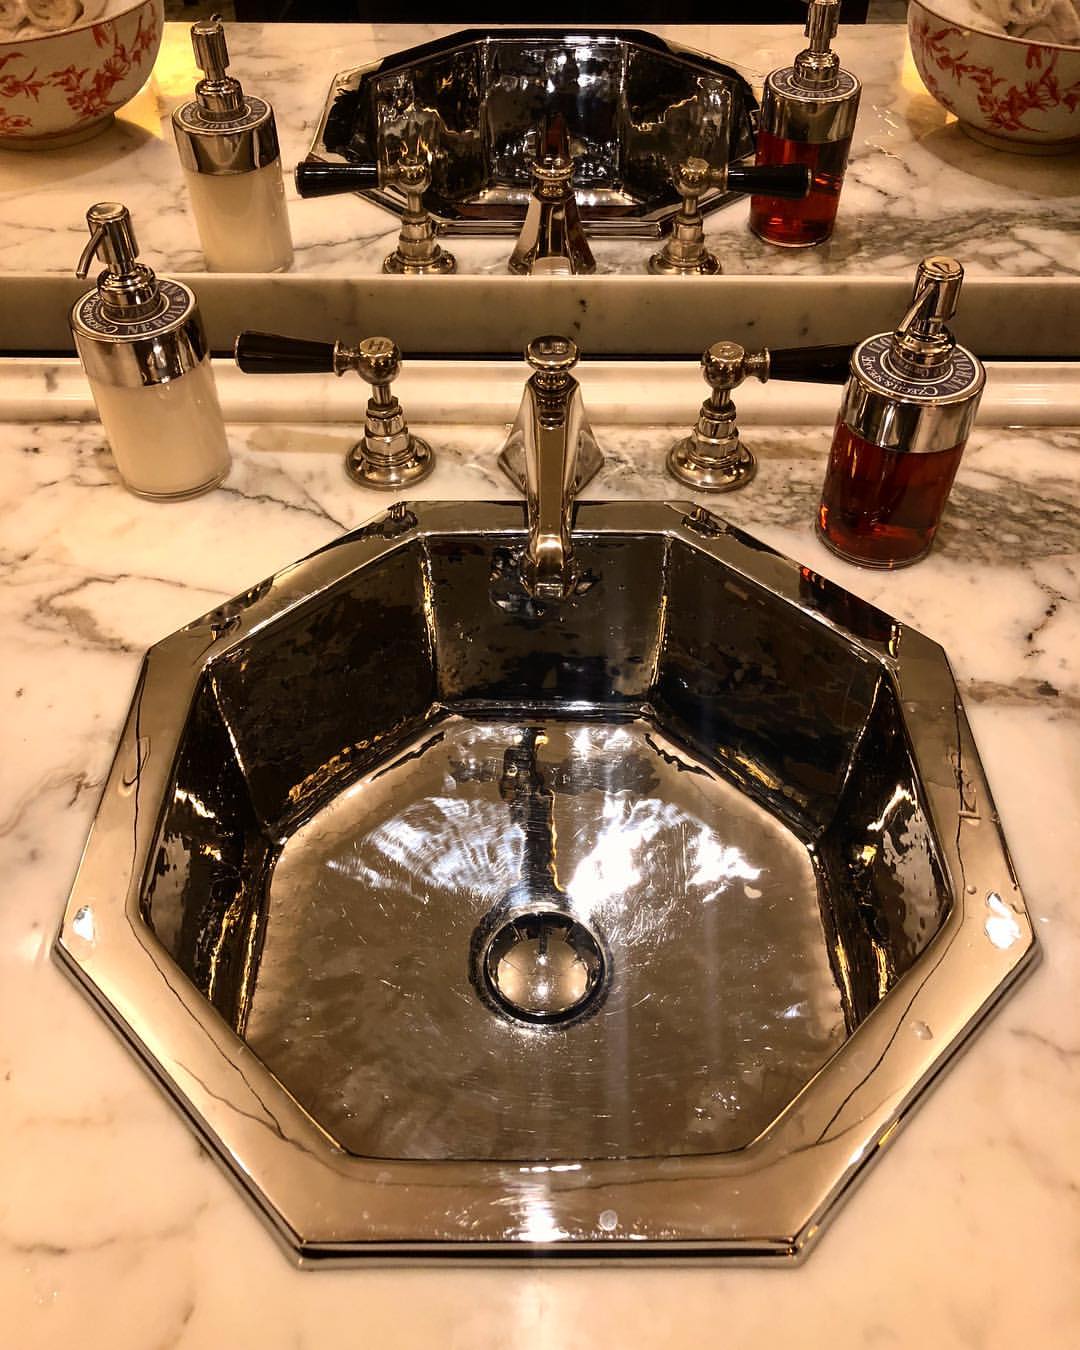 Wow I love this sink the design is cool